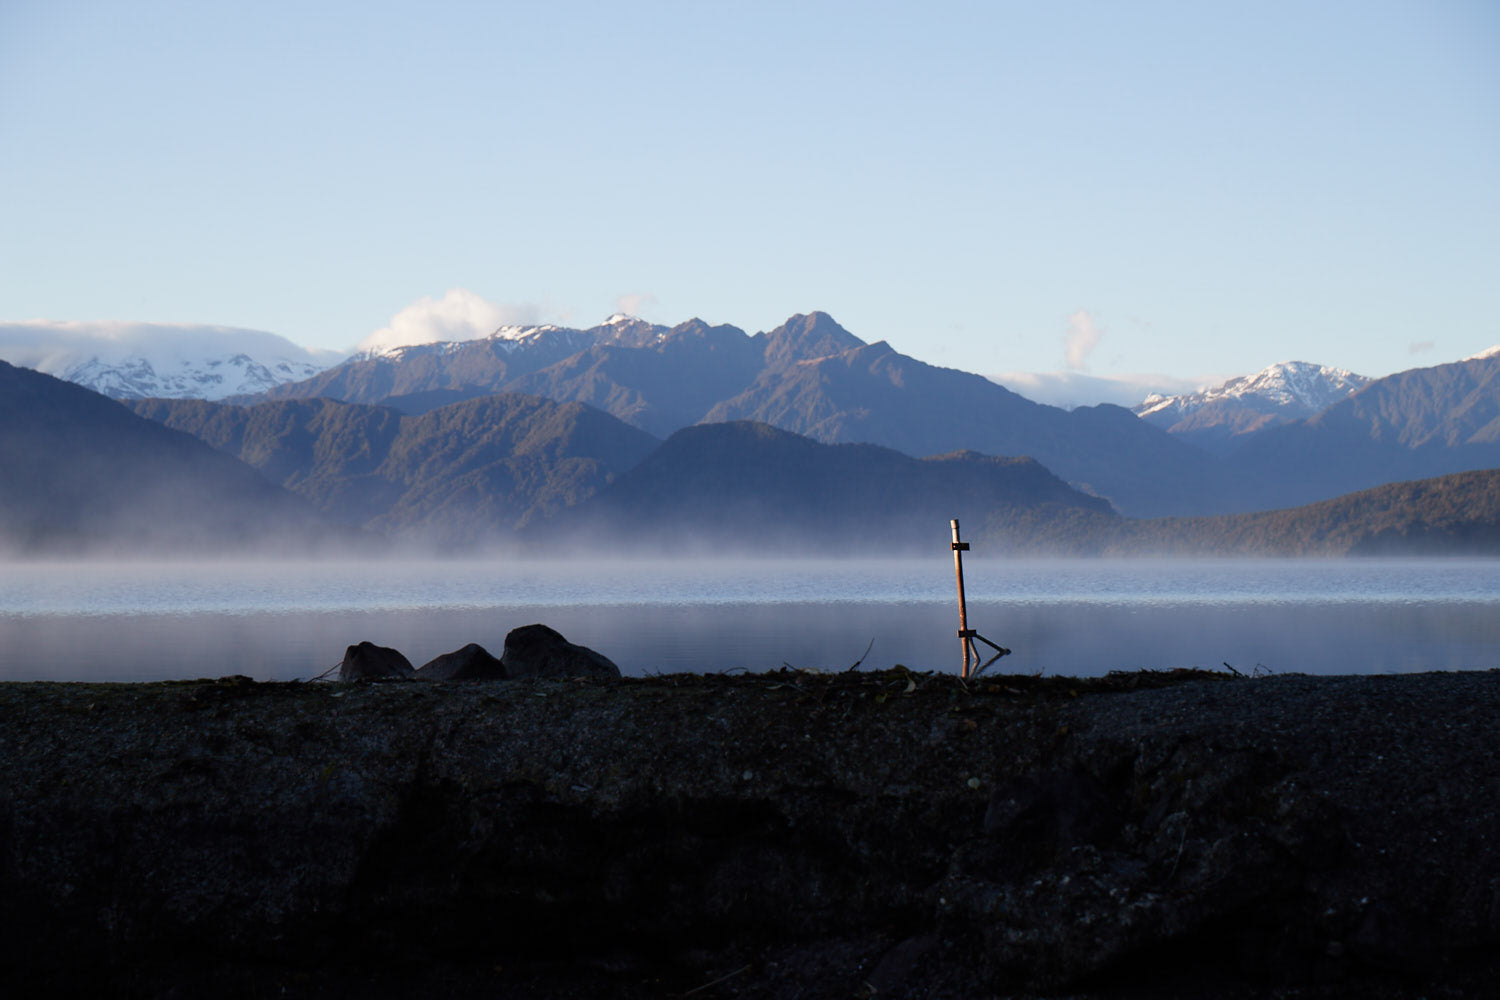 Drawing inspiration from concept of kaitiaki